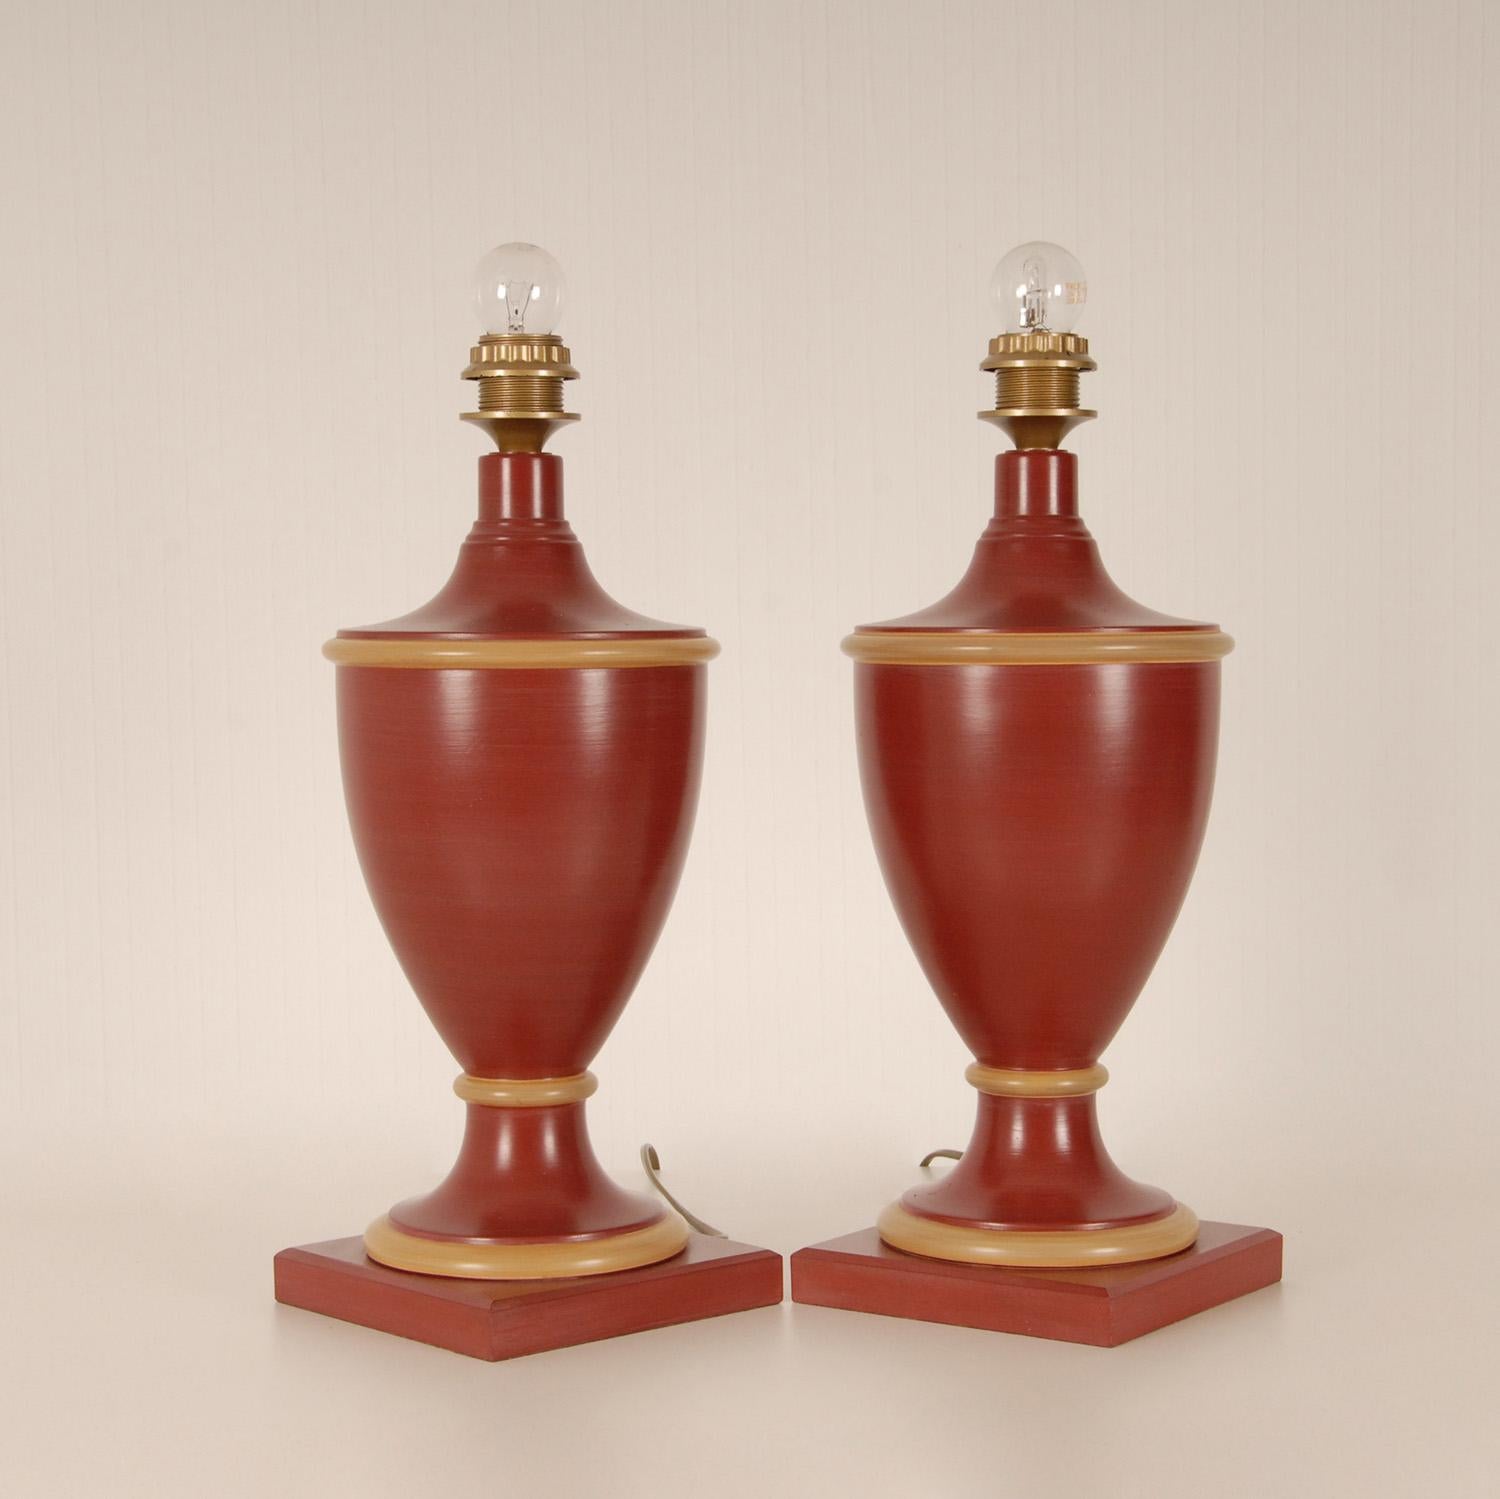 Vintage French Ceramic Burgundy Red Table Lamps Buffet Vase Lamps, a Pair 2